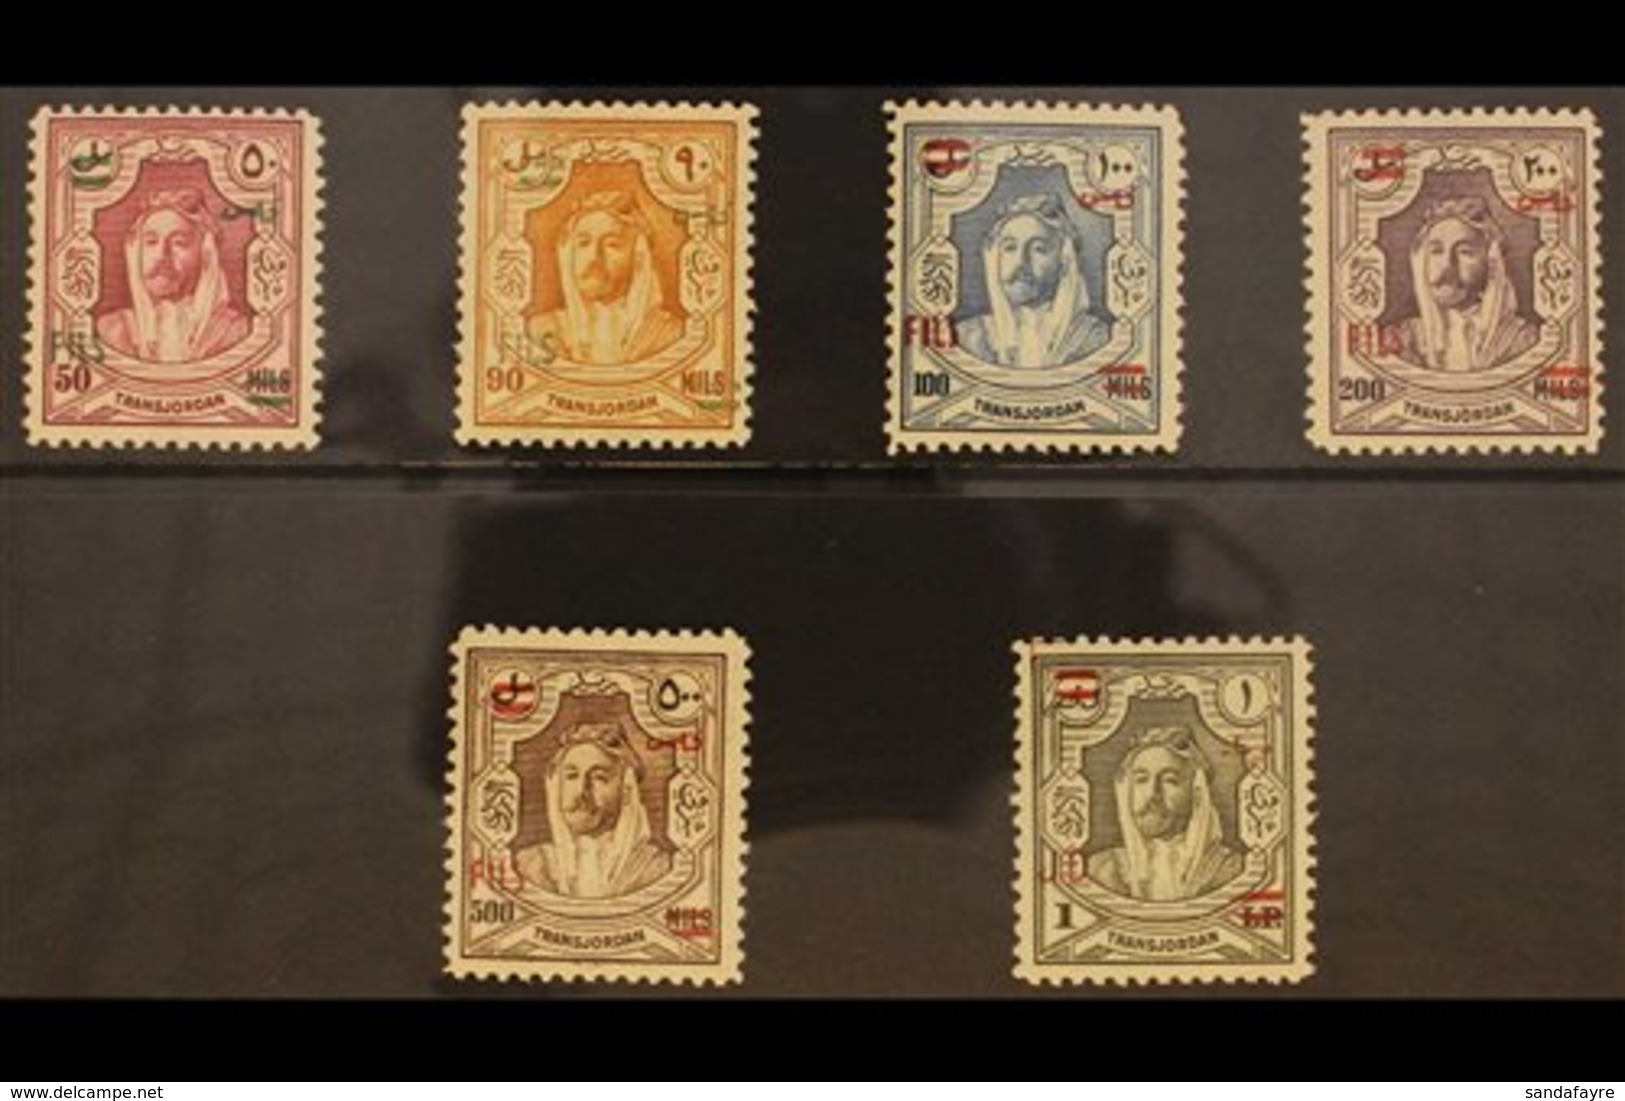 1952 HIGH VALUES SET King Talal Opt'd High Values Set, 50f On 50m To 1d On £1, SG 328/33, Never Hinged Mint (6 Stamps) F - Jordanie